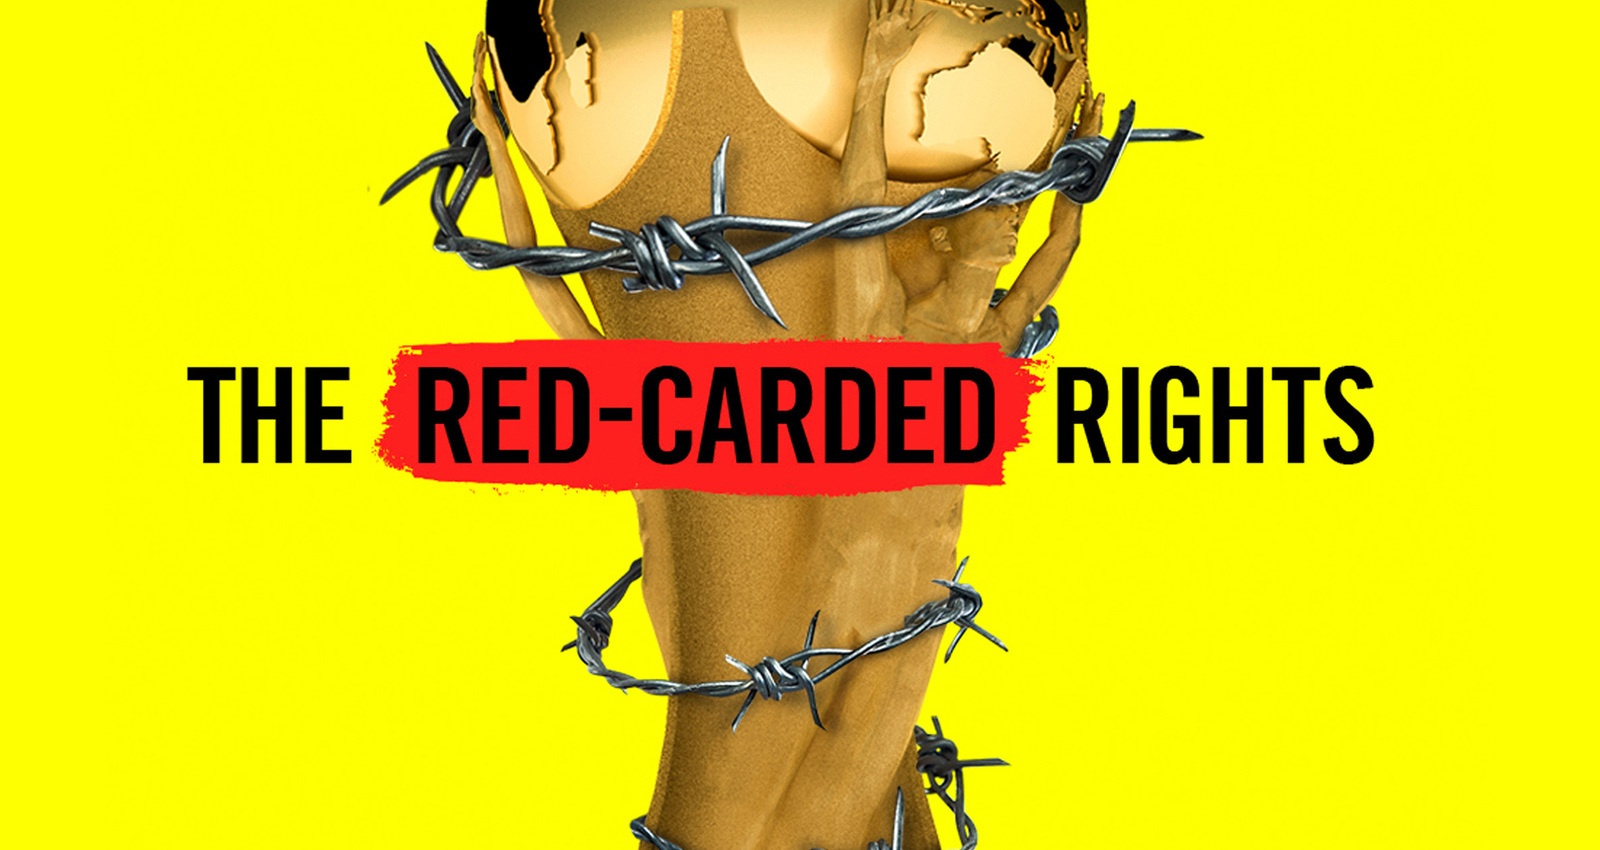 The Red-Carded Rights